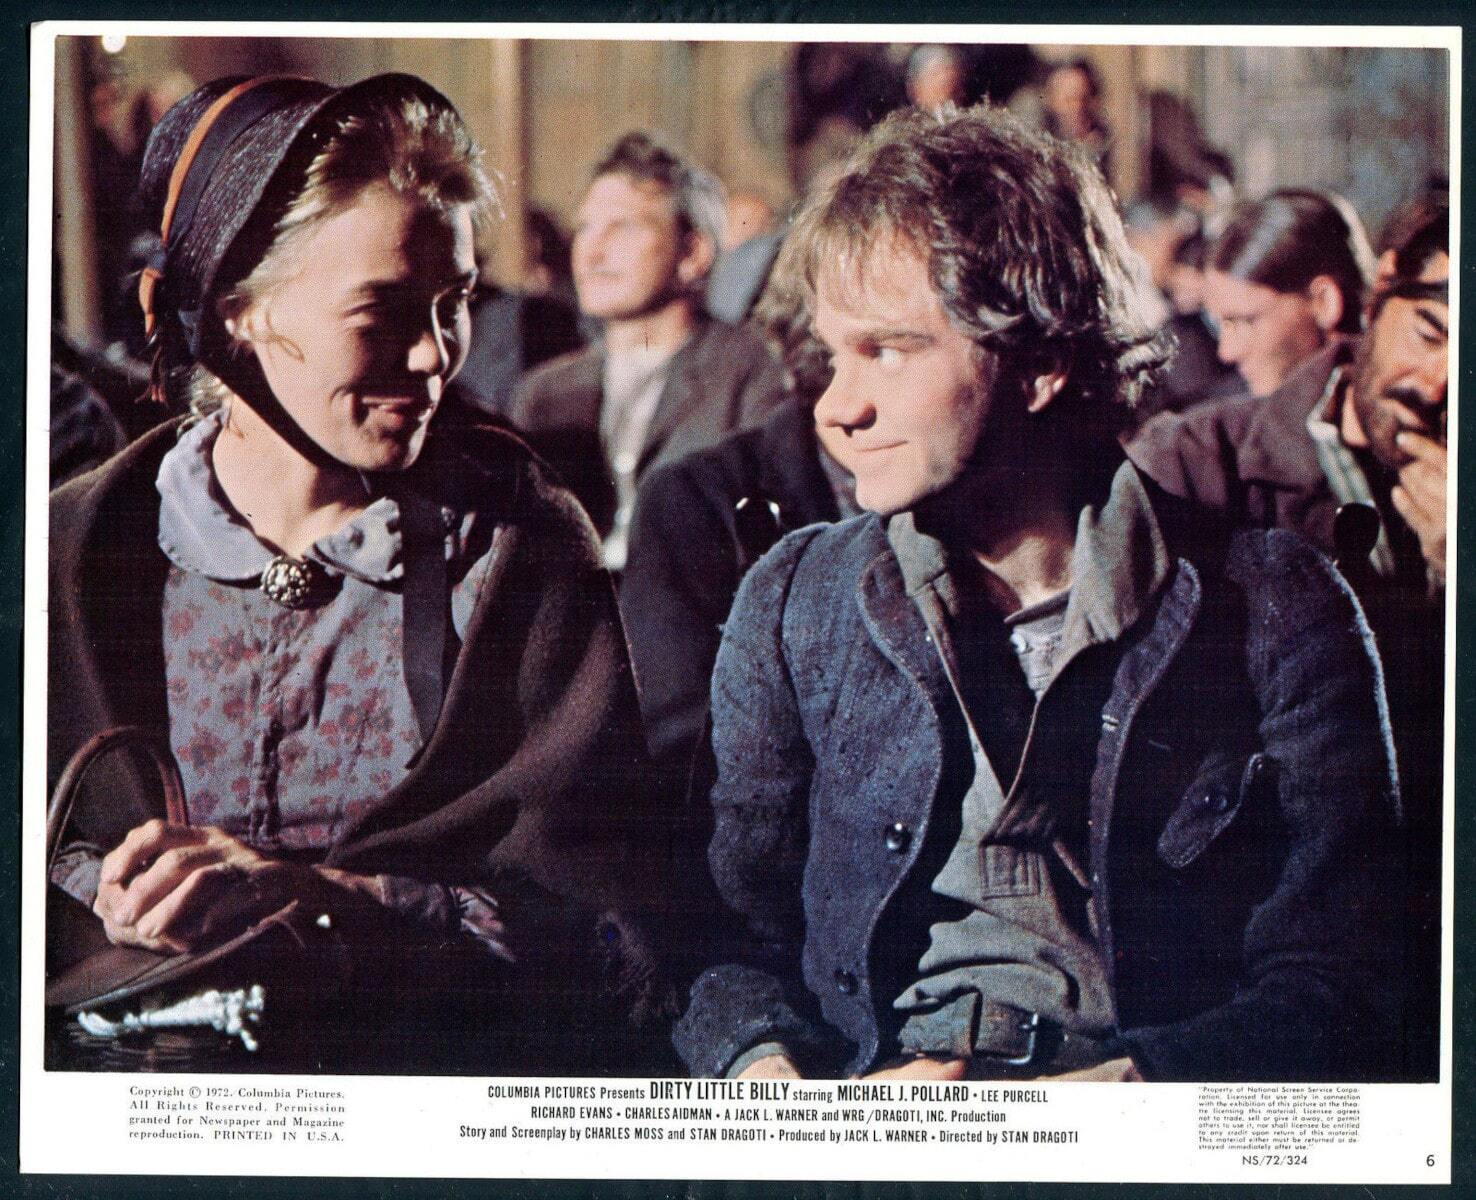 <p>1972’s <a href="https://www.imdb.com/title/tt0068487/?ref_=nv_sr_srsg_0" title="https://www.imdb.com/title/tt0068487/?ref_=nv_sr_srsg_0"><em>Dirty Little Billy</em></a> was less a western and more of a gritty, realistic portrayal of Billy the Kid’s early years, when he was more down on his luck. <a href="https://www.imdb.com/name/nm0689488/?ref_=ttfc_fc_cl_t1" title="https://www.imdb.com/name/nm0689488/?ref_=ttfc_fc_cl_t1">Michael J. Pollard</a> plays 17-year-old Billy Bonney, before he gains notoriety as Billy the Kid. <em>Dirty Little Billy </em>also features the film debut (albeit uncredited) of <a href="https://www.imdb.com/name/nm0000560/?ref_=ttfc_fc_cl_t24" title="https://www.imdb.com/name/nm0000560/?ref_=ttfc_fc_cl_t24">Nick Nolte</a> as a gang leader. </p>